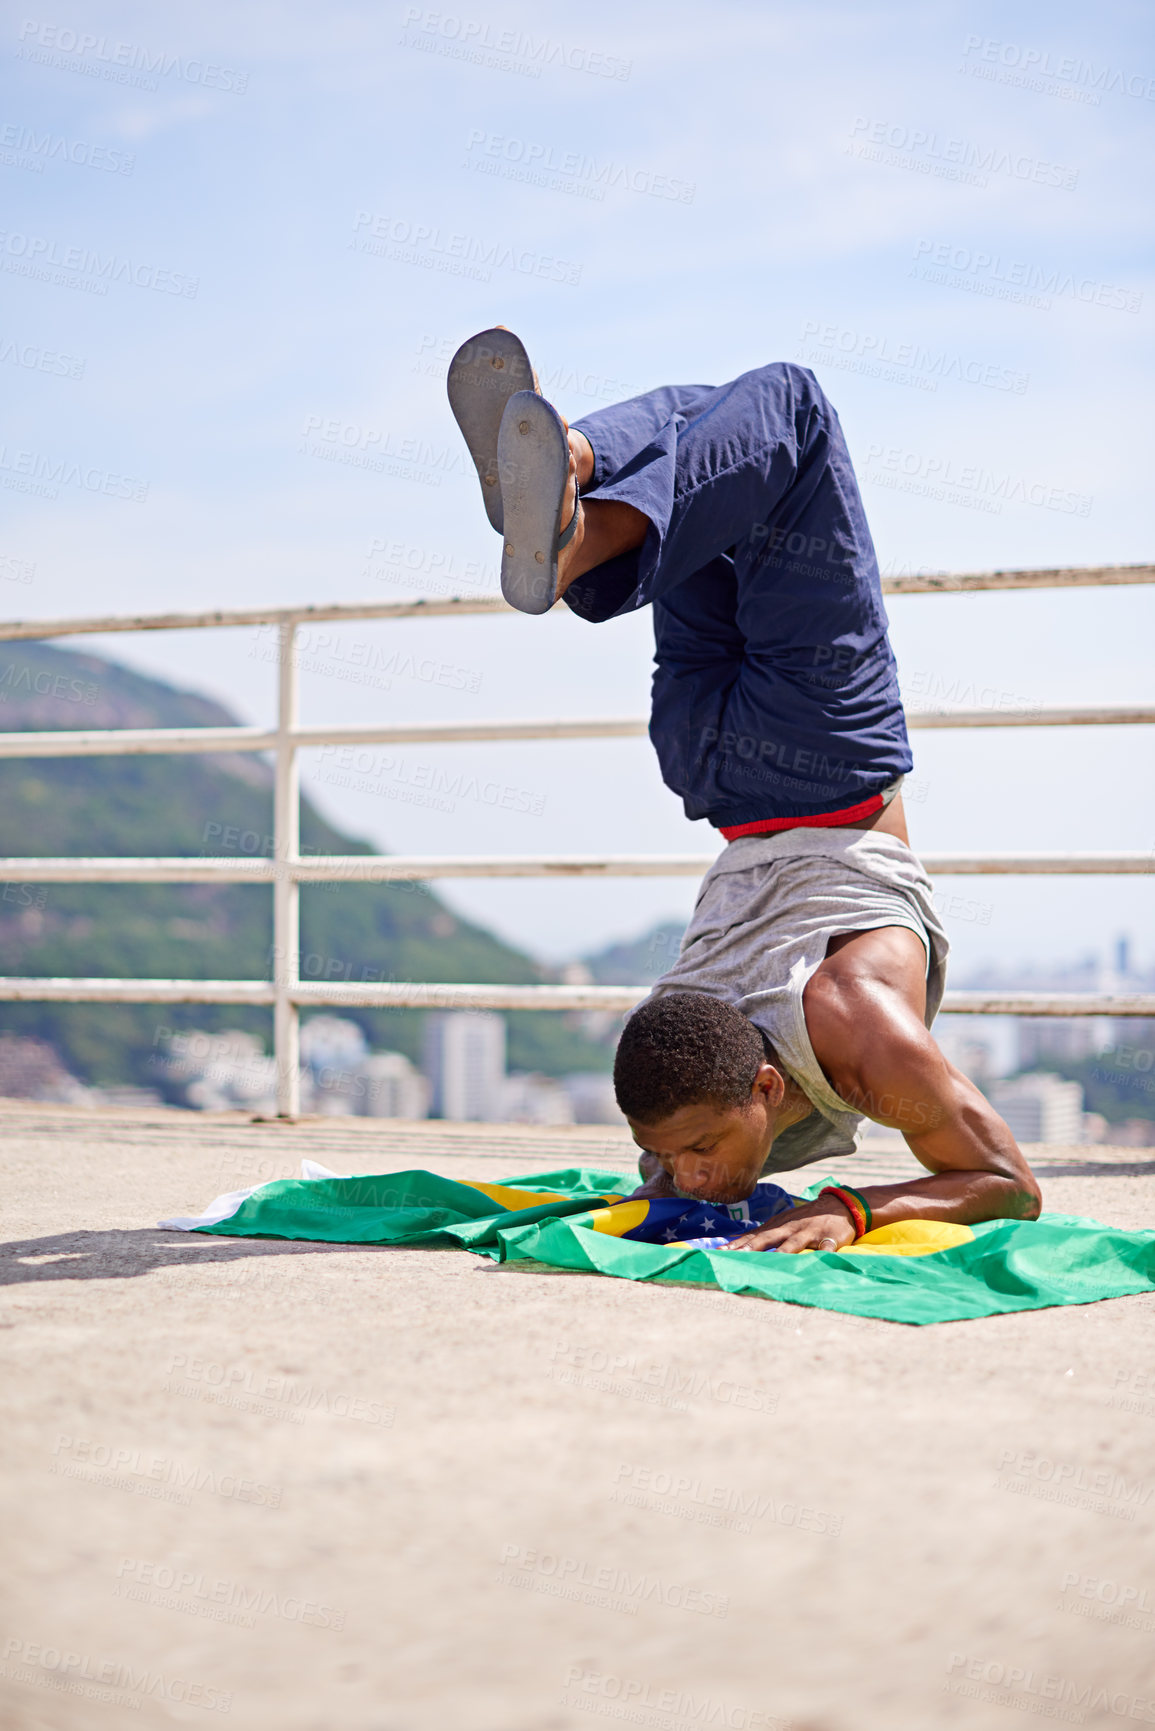 Buy stock photo Low angle shot of a young male breakdancer in an urban setting